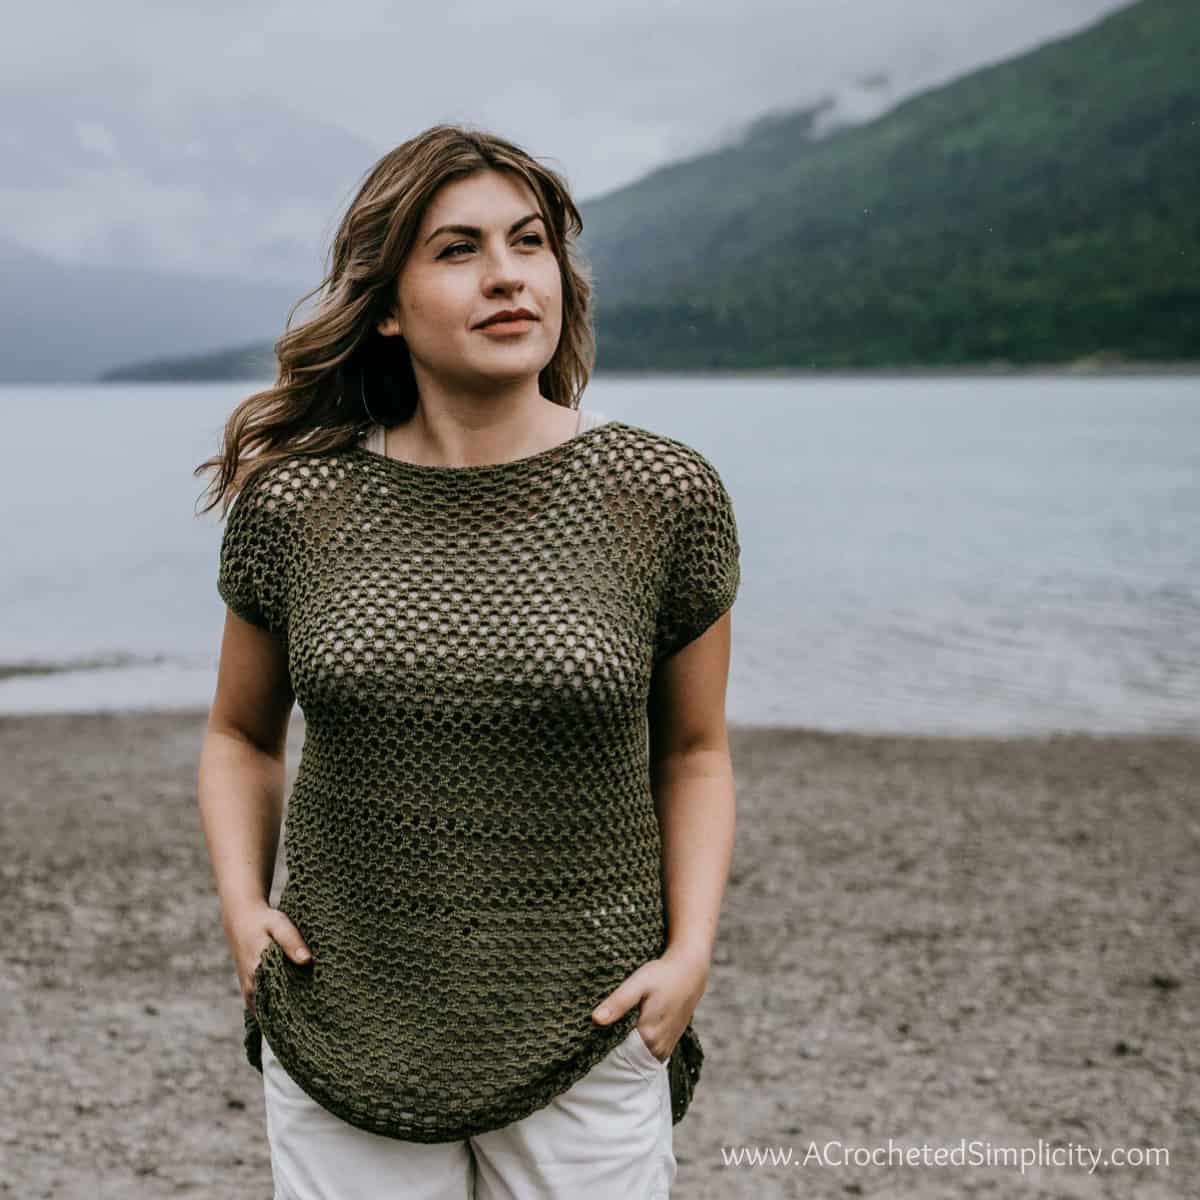 Model wearing a crochet mesh top with hands in her pockets while standing on a beach and looking off into the distance.